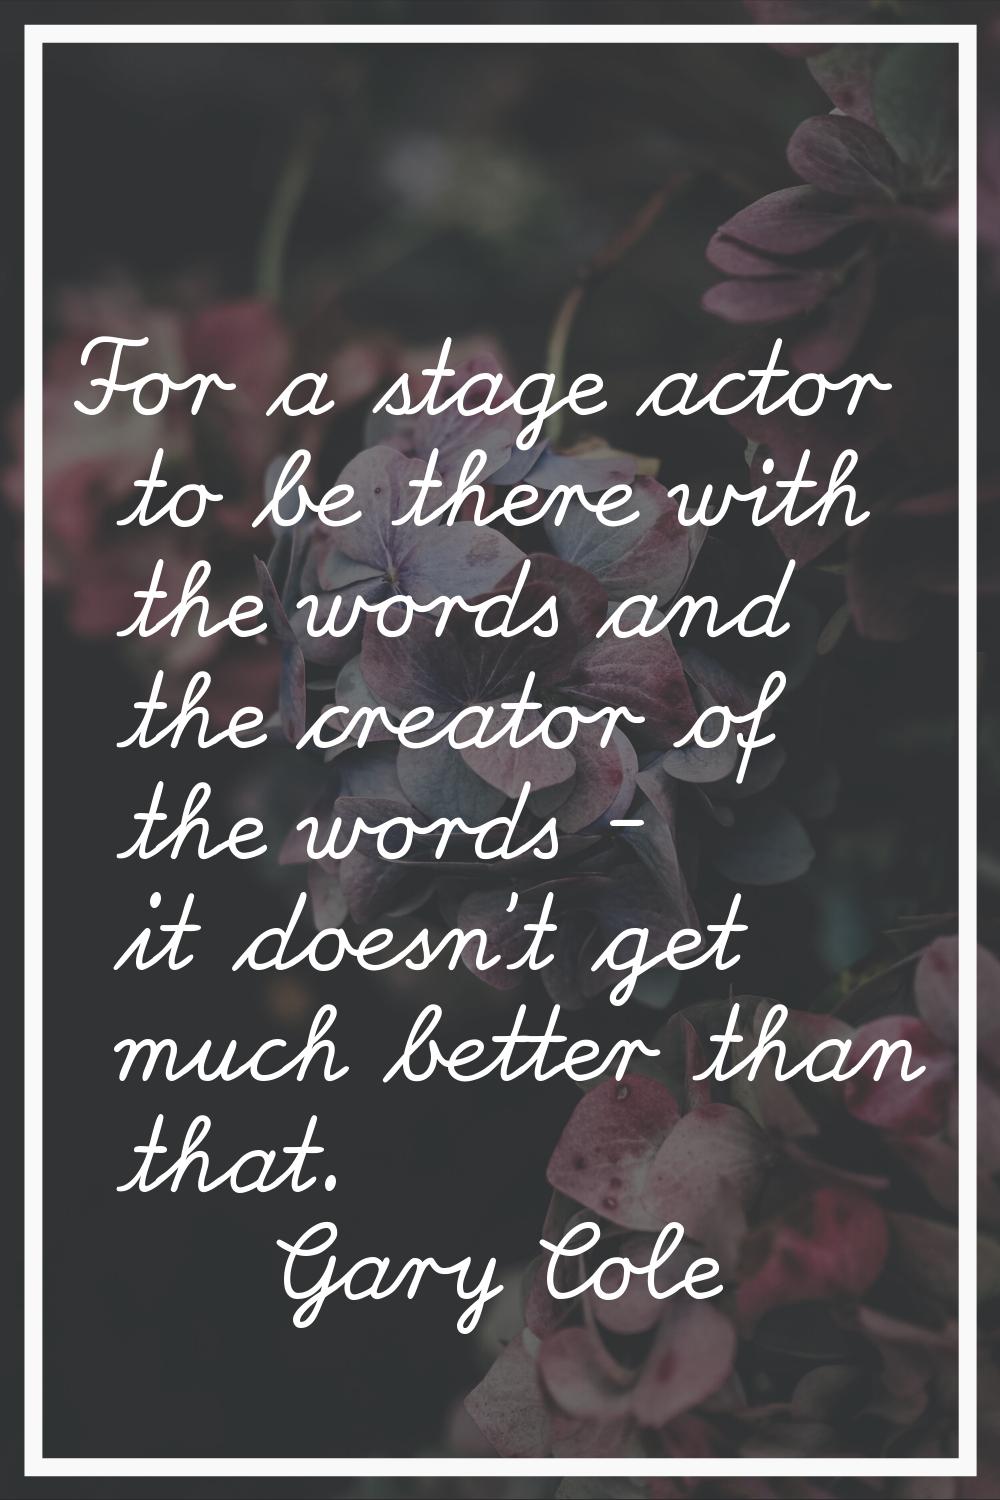 For a stage actor to be there with the words and the creator of the words - it doesn't get much bet